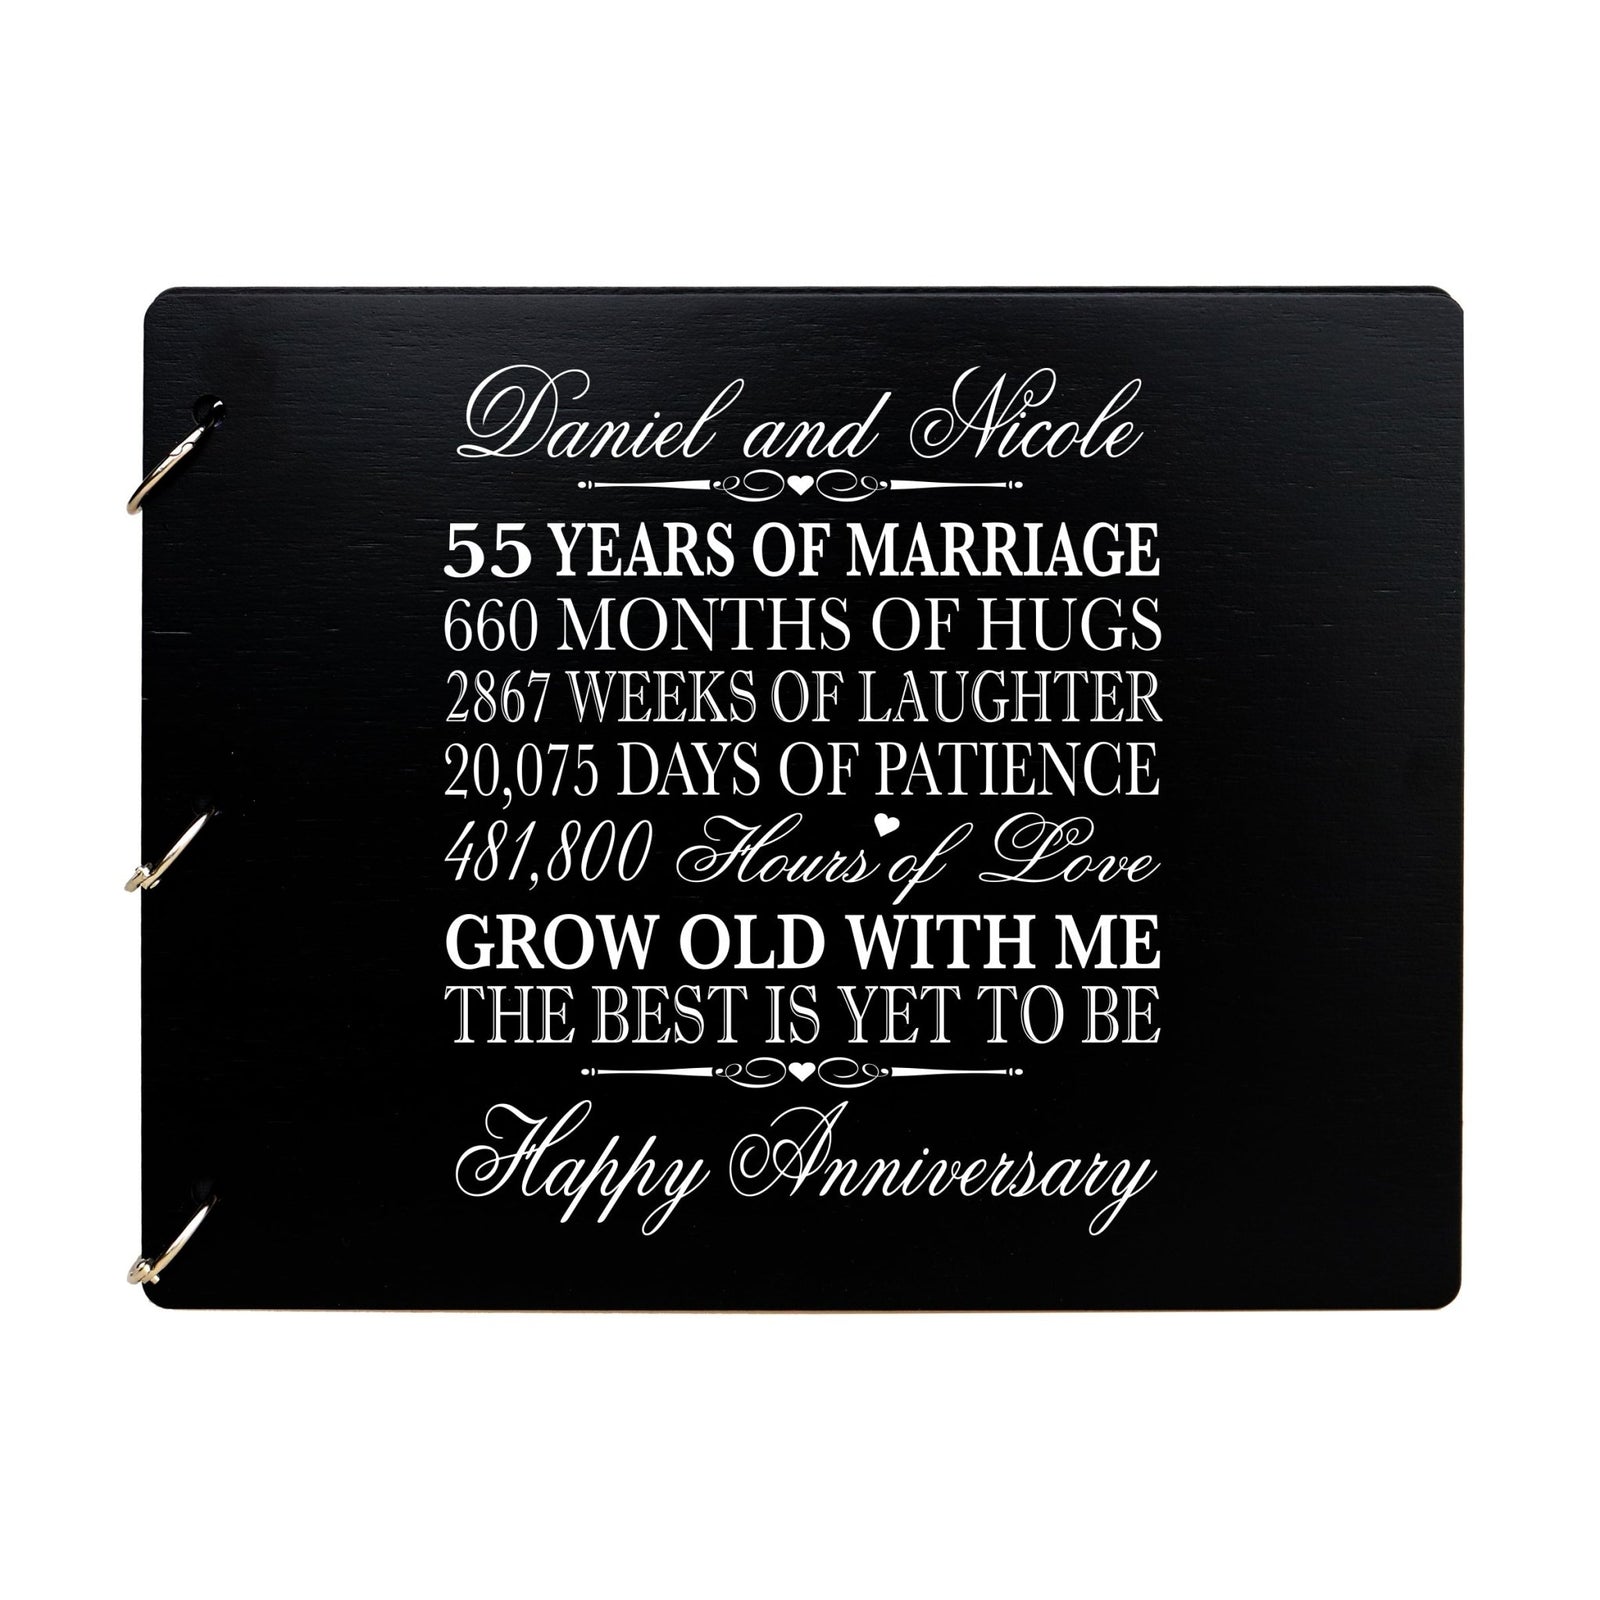 Personalized Guest Book Sign for 55th Wedding Anniversary - Grow Old With Me - LifeSong Milestones